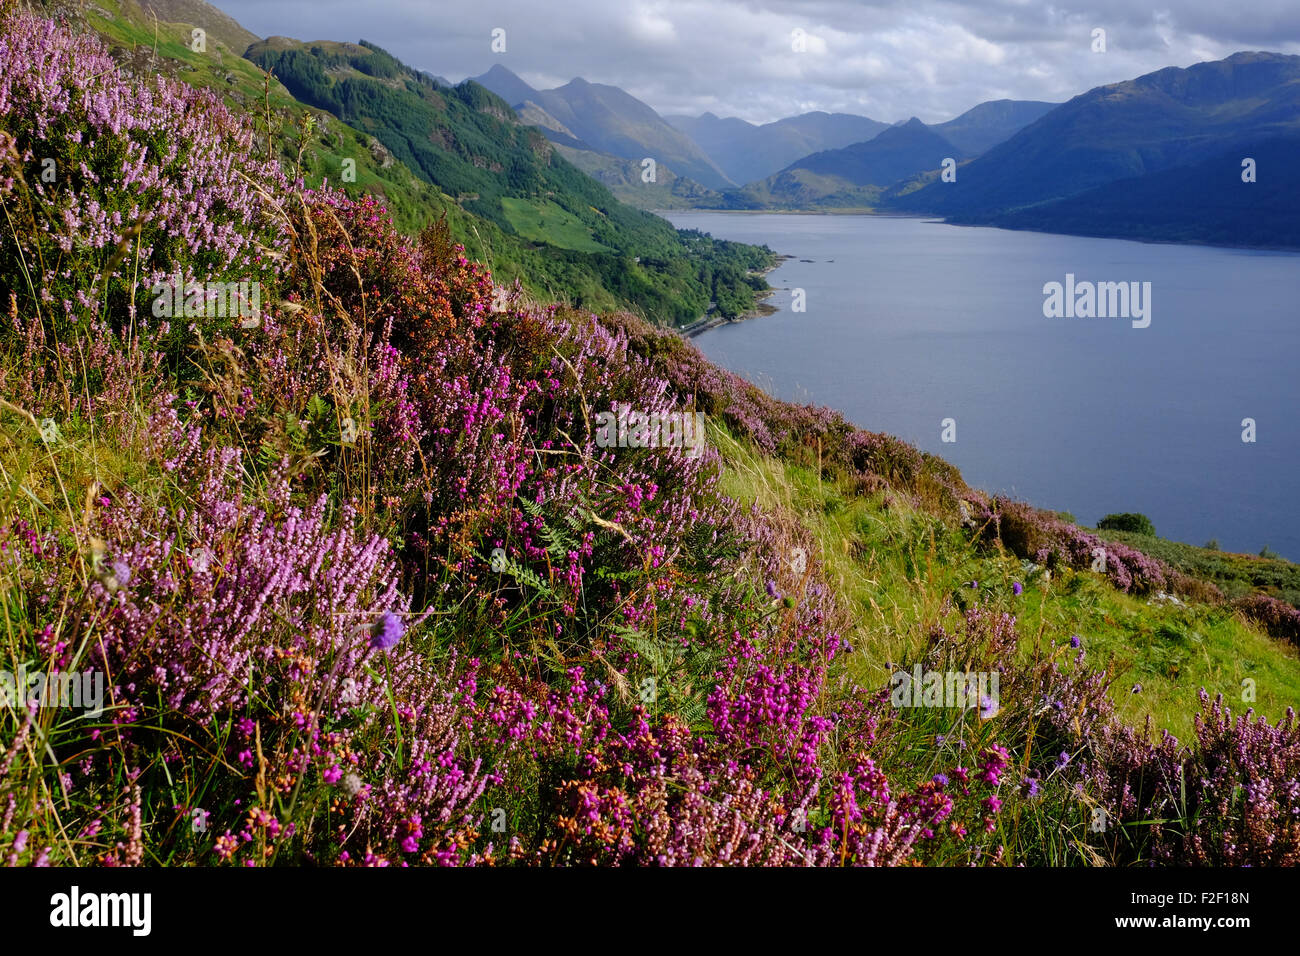 Looking east along Loch Duich towards the Five Sisters of Kintail in the West Highlands of Scotland. Purple heather in foreground Stock Photo